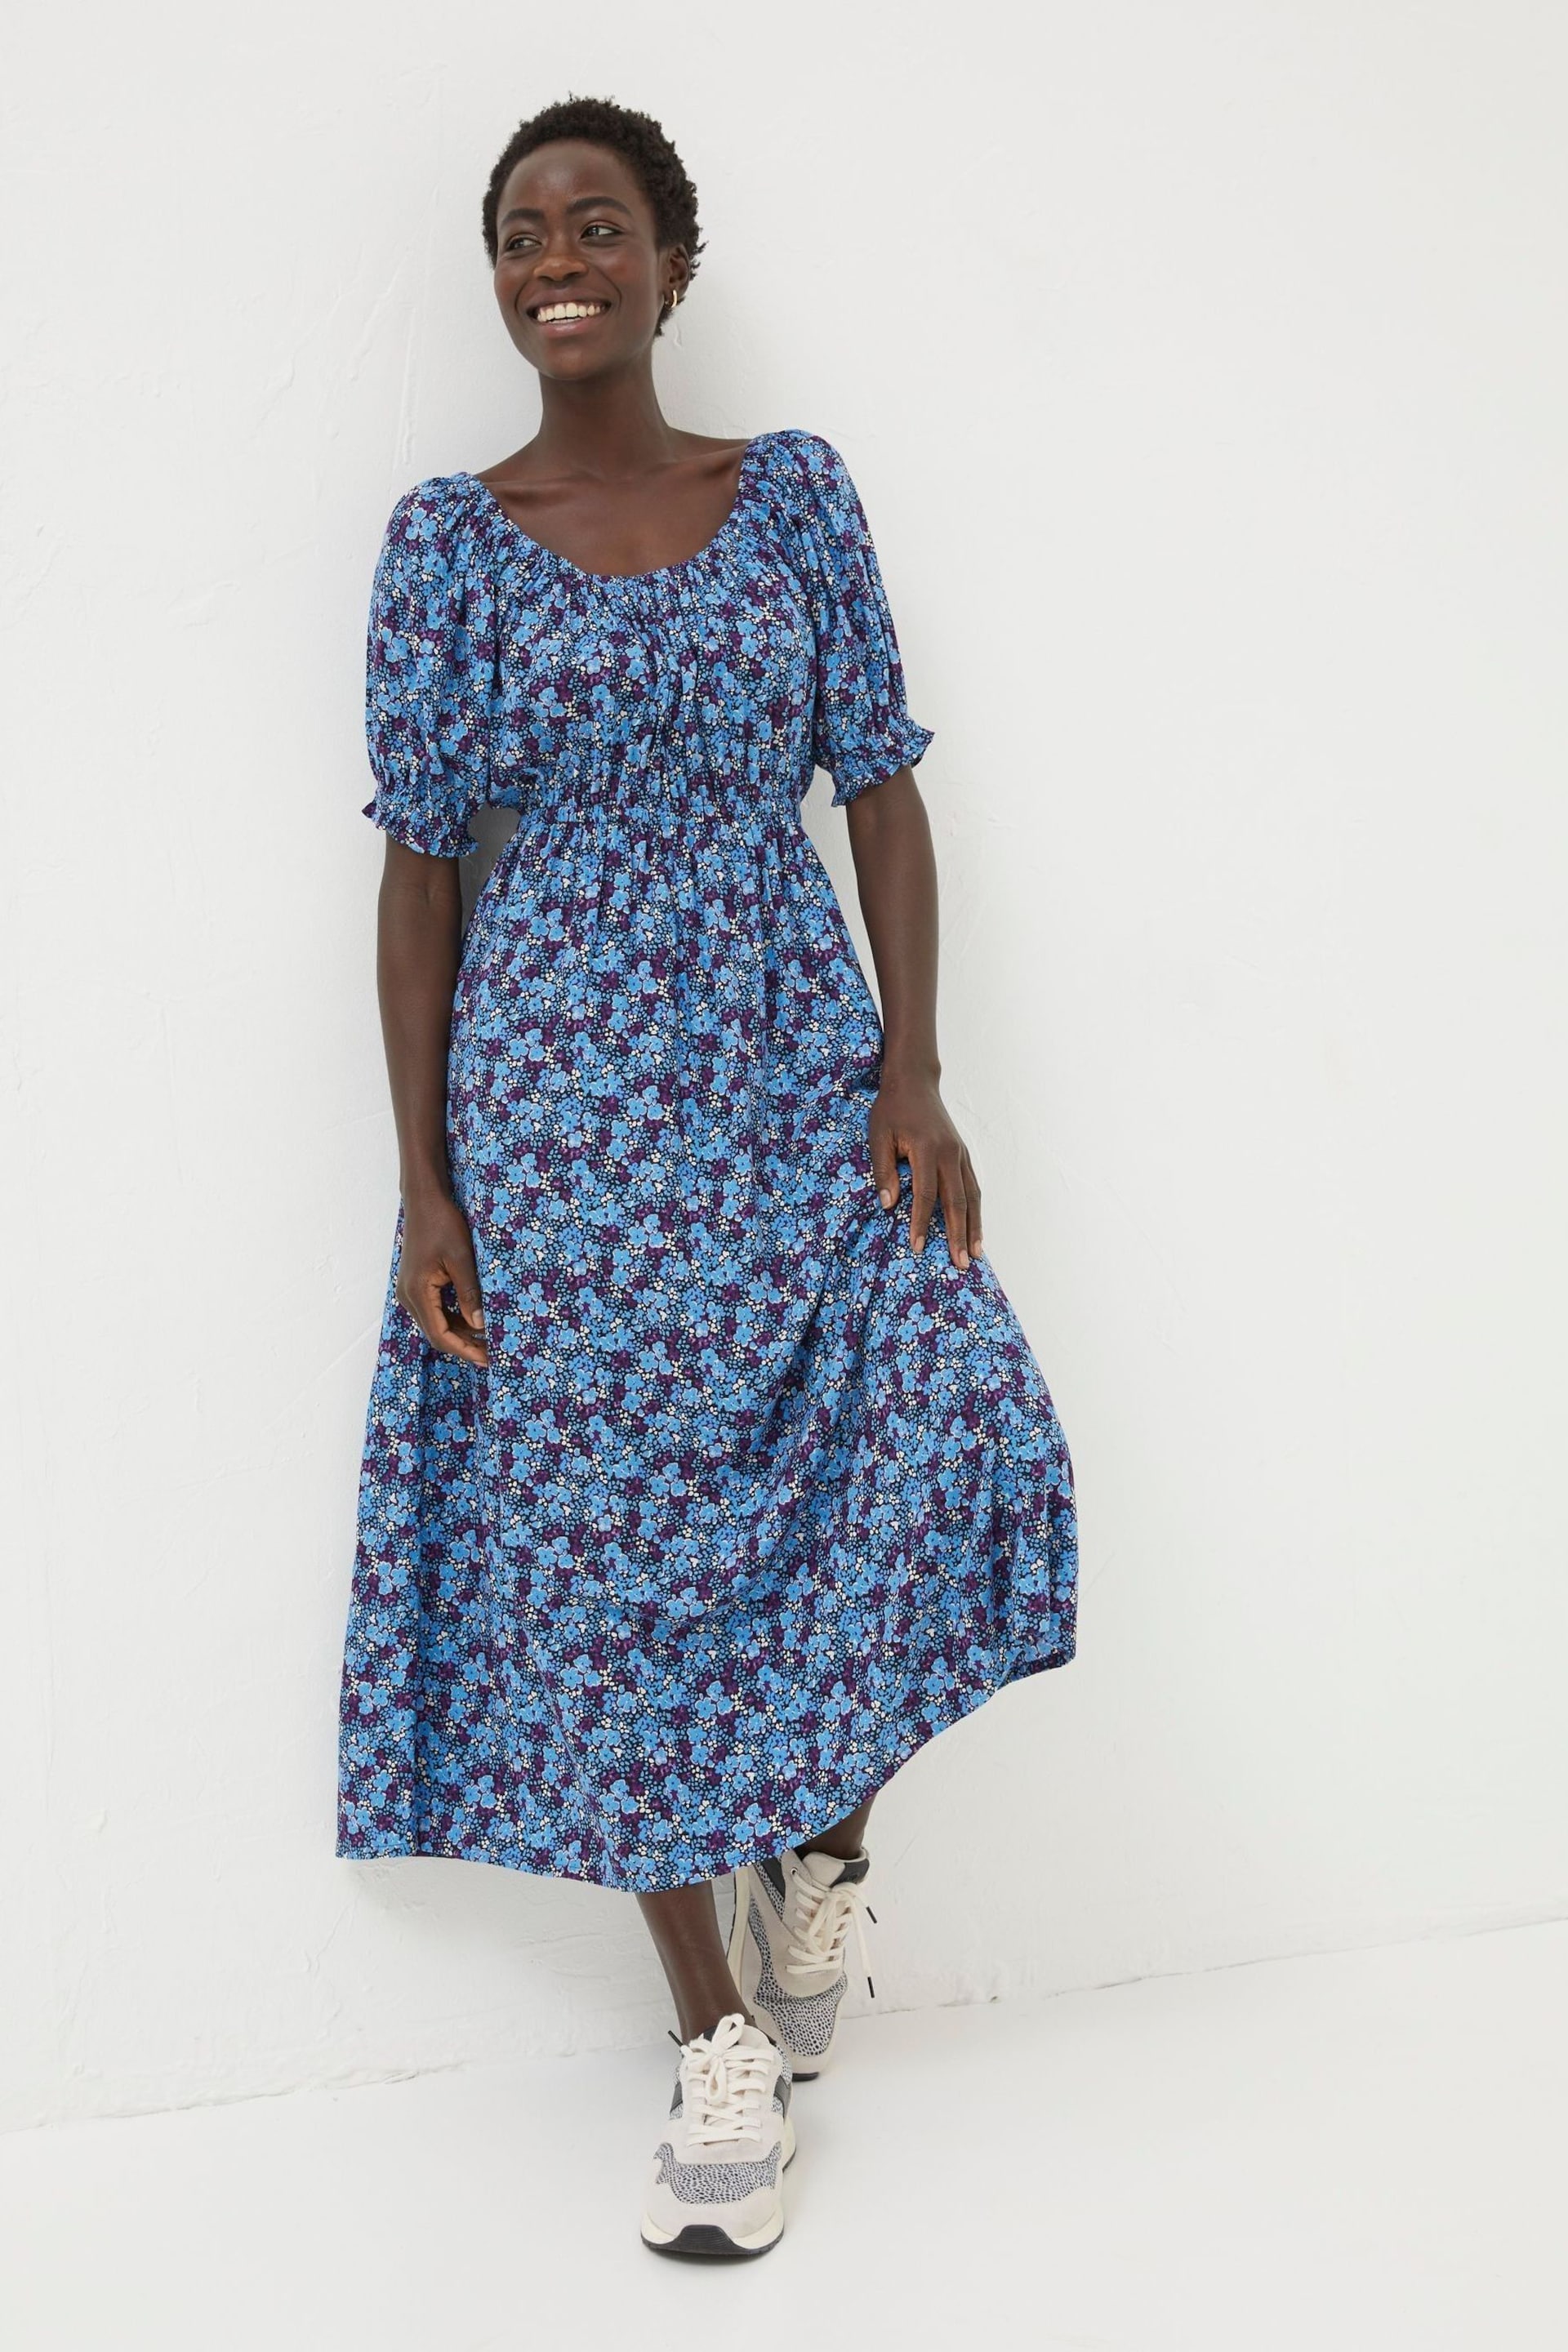 FatFace Purple Ink Floral Midi Dress - Image 1 of 6